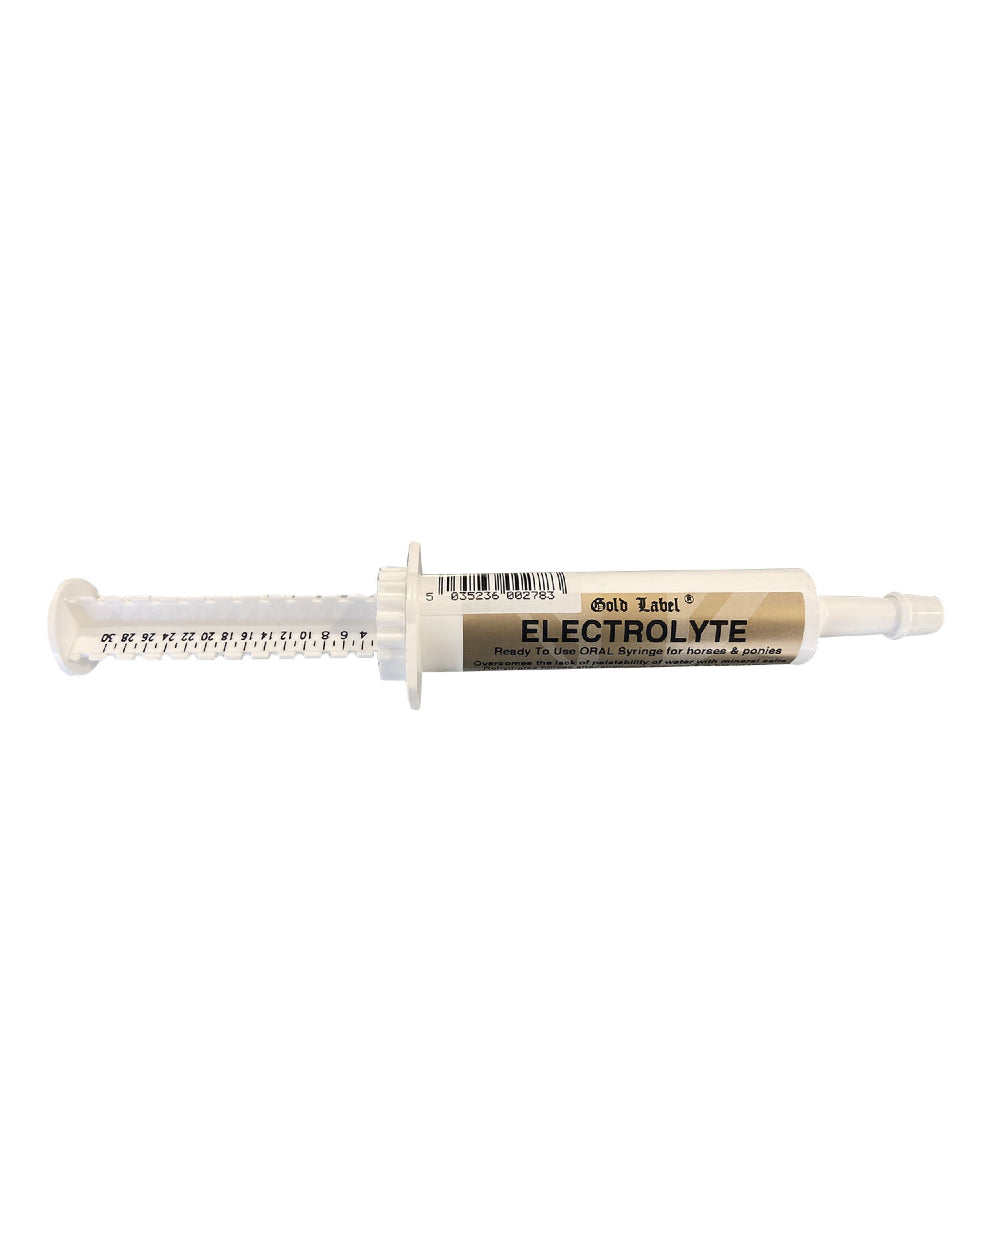 Gold Label Electrolyte Oral On A White Background